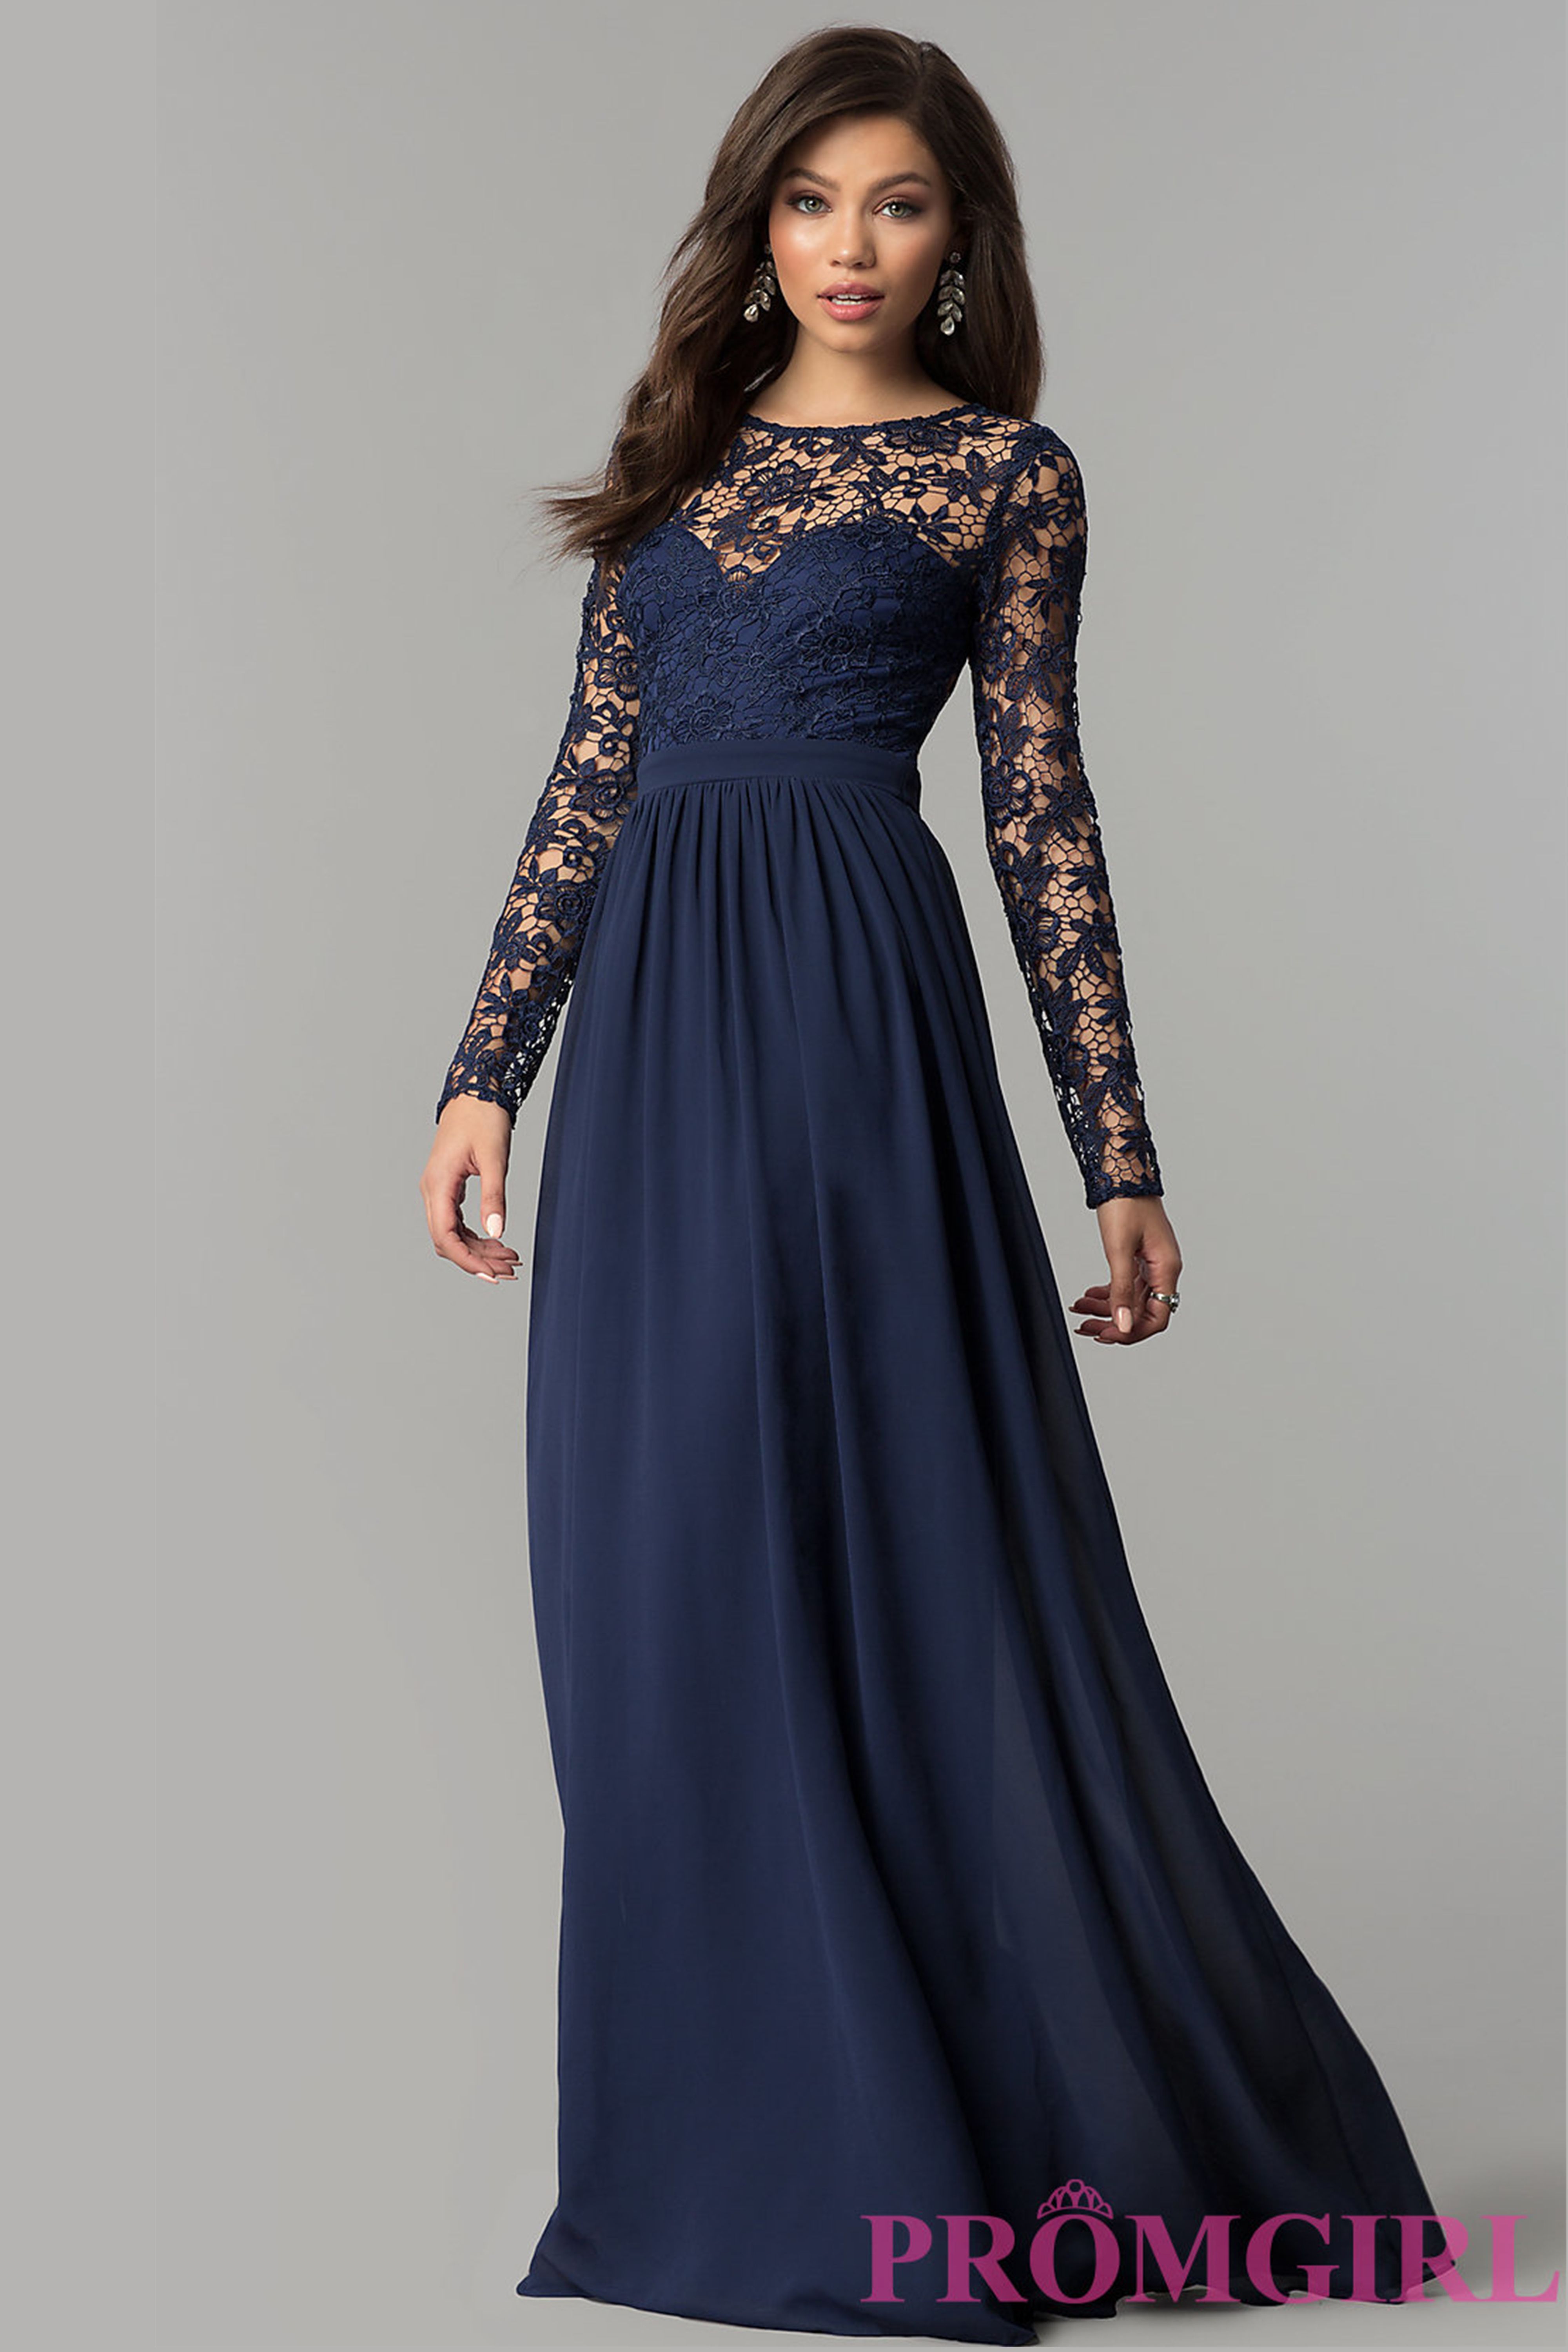 Royal blue gown – Goddess Exclusive